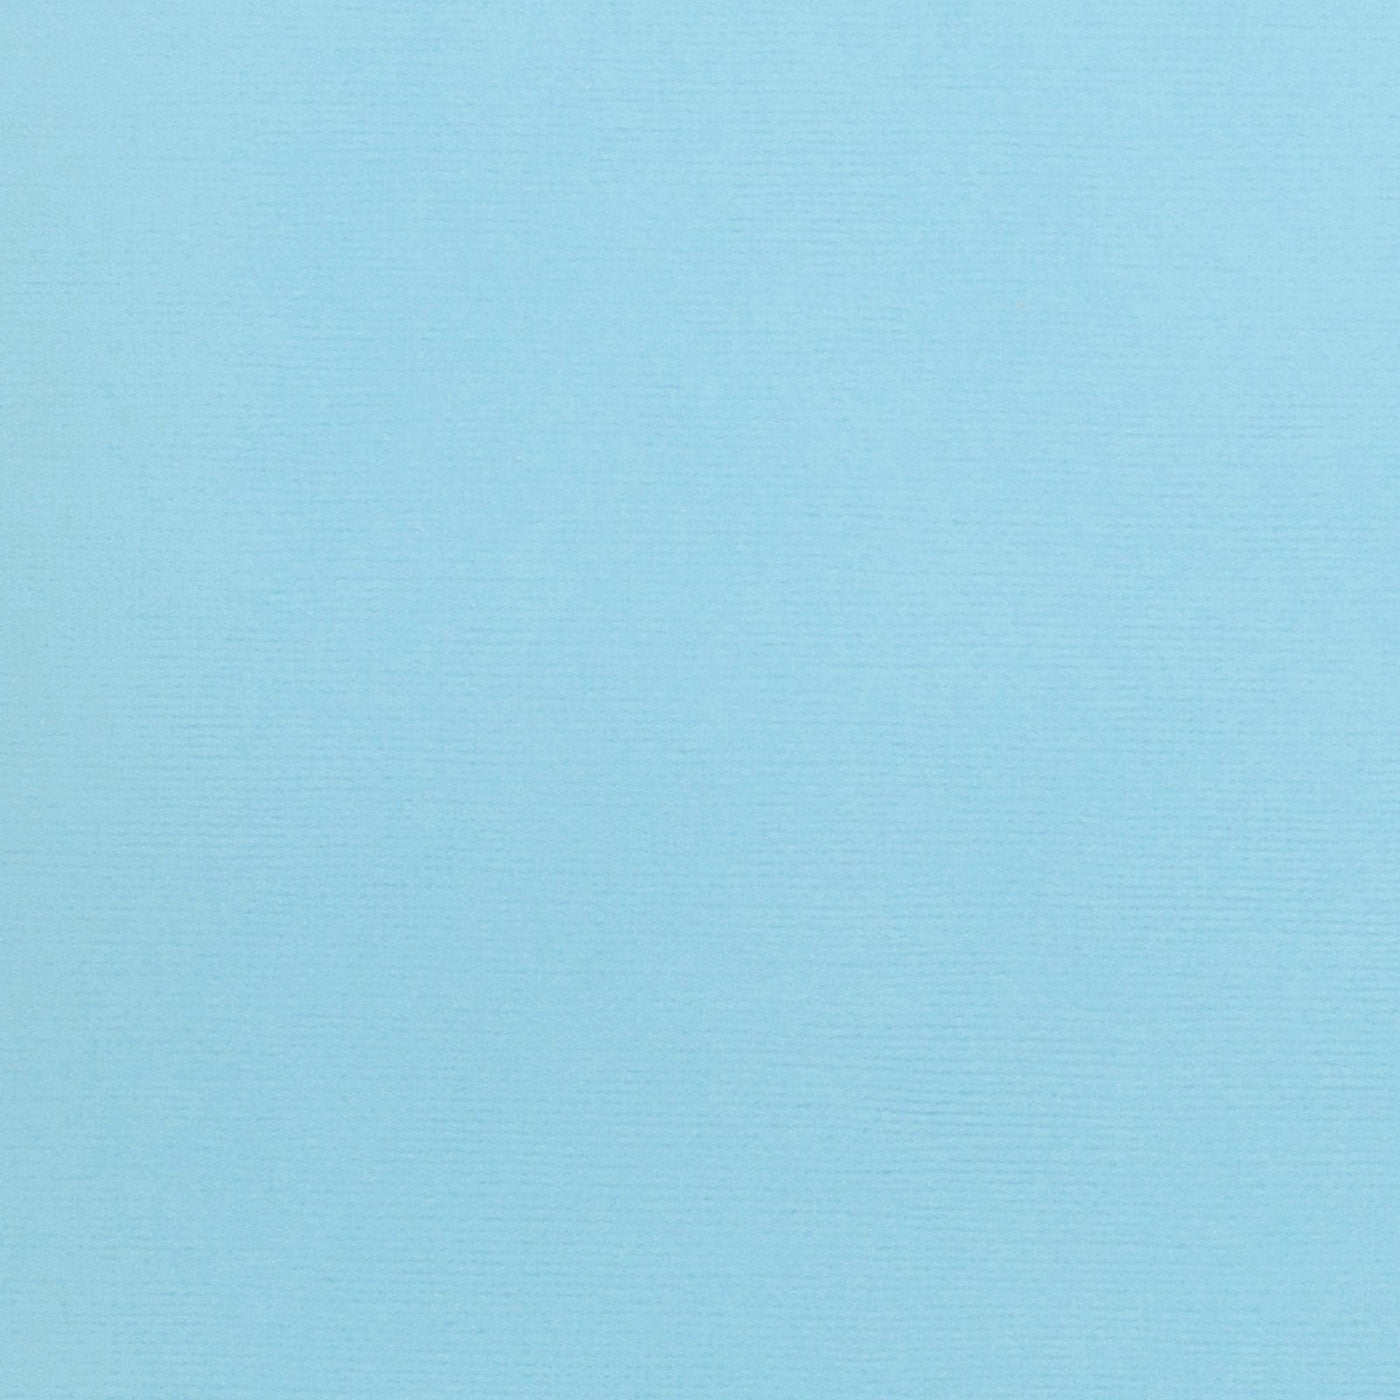 PACIFIC blue cardstock - 12x12 inch - 80 lb - textured scrapbook paper - American Crafts